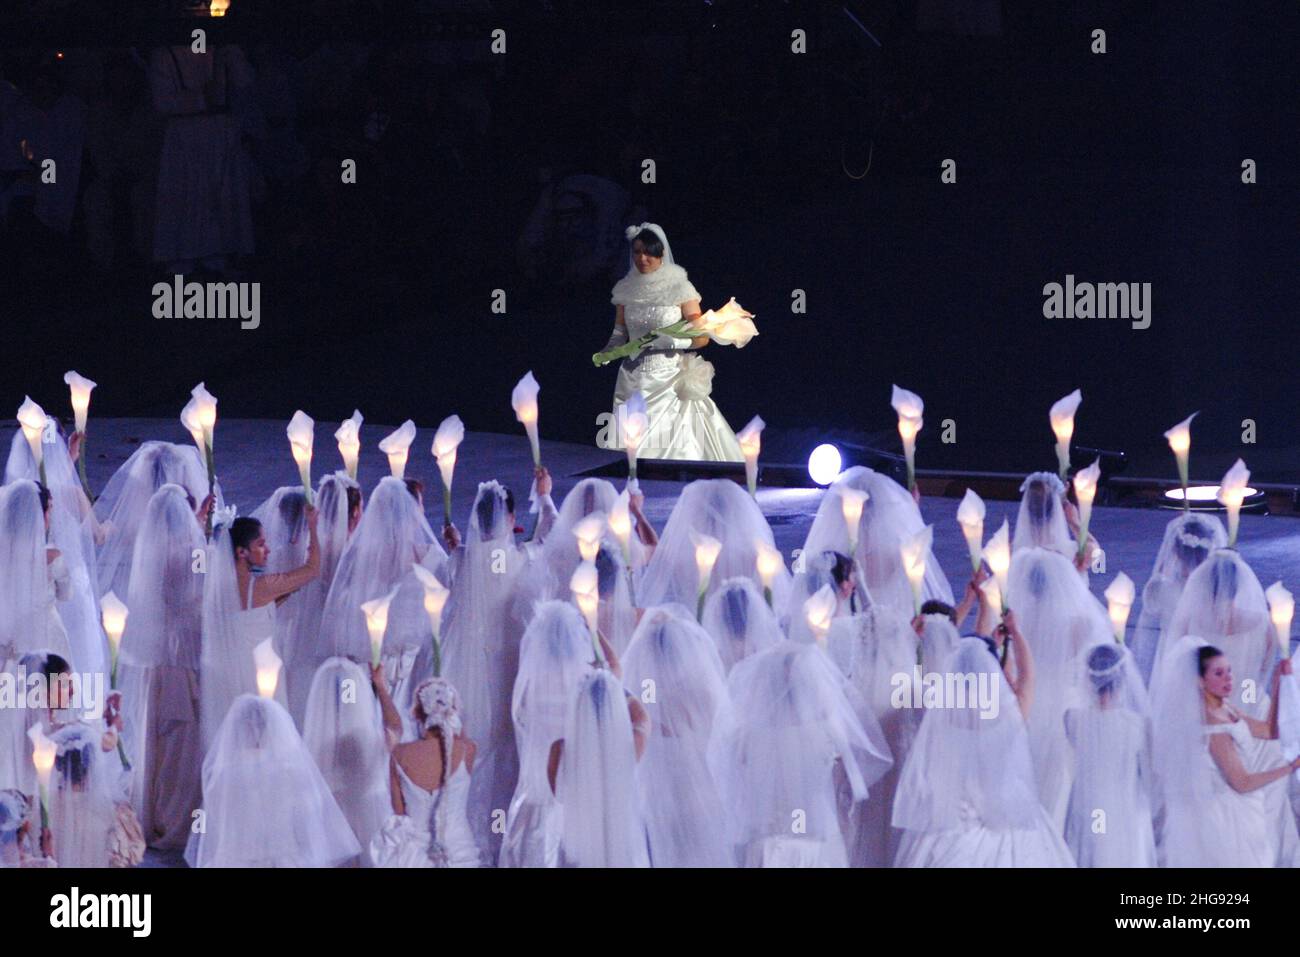 Turin Italy 26-02-2006:Turin 2006 Olympic Winter Games, closing ceremony of the Olympic Games,Isolde Kostner, dressed as a bride, entered the scene along with 400 other brides Stock Photo